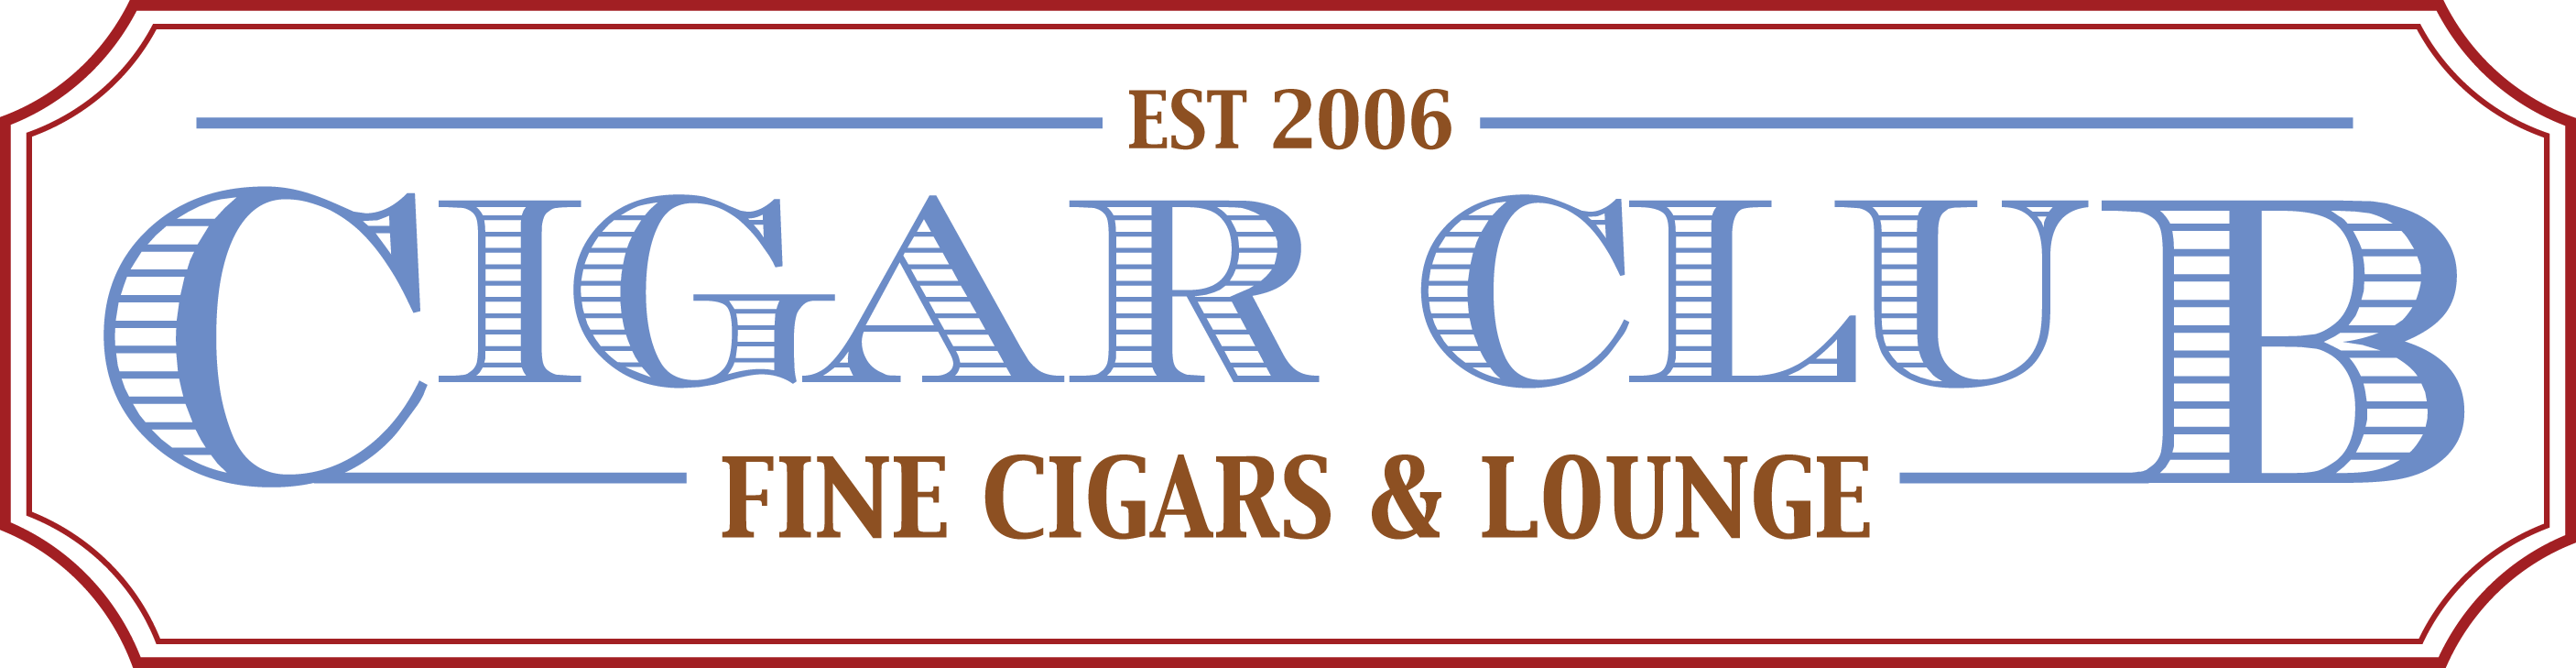 Cigar Club Lake Charles Clipart - Large Size Png Image - PikPng